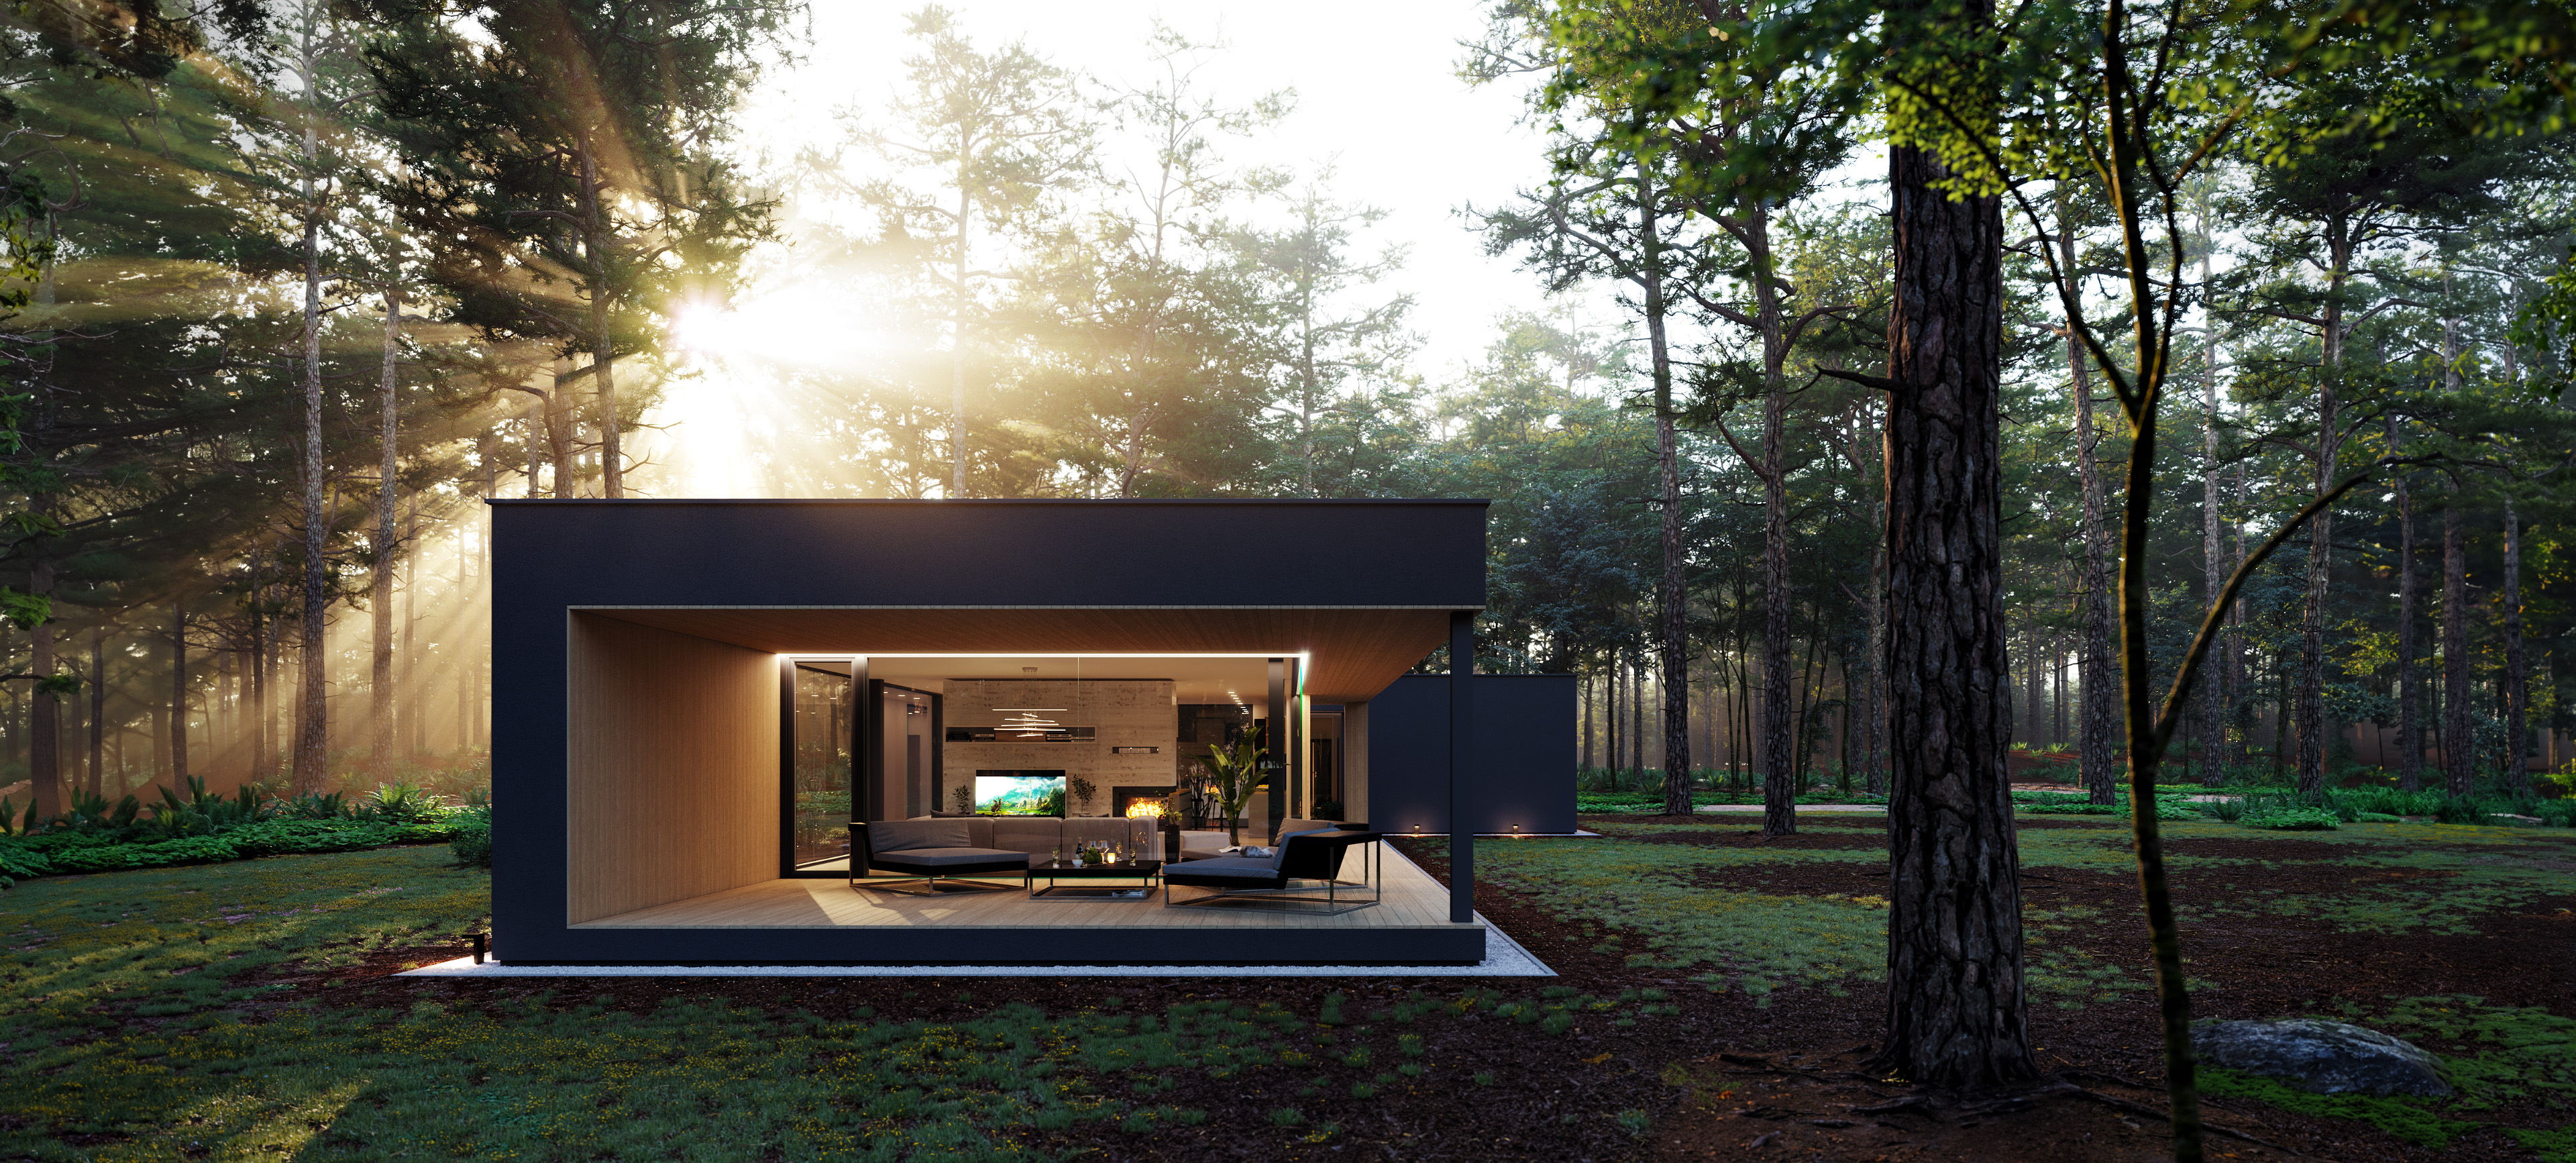 rendering 3d visualization architectural realistic 3d corner forest house sunrise